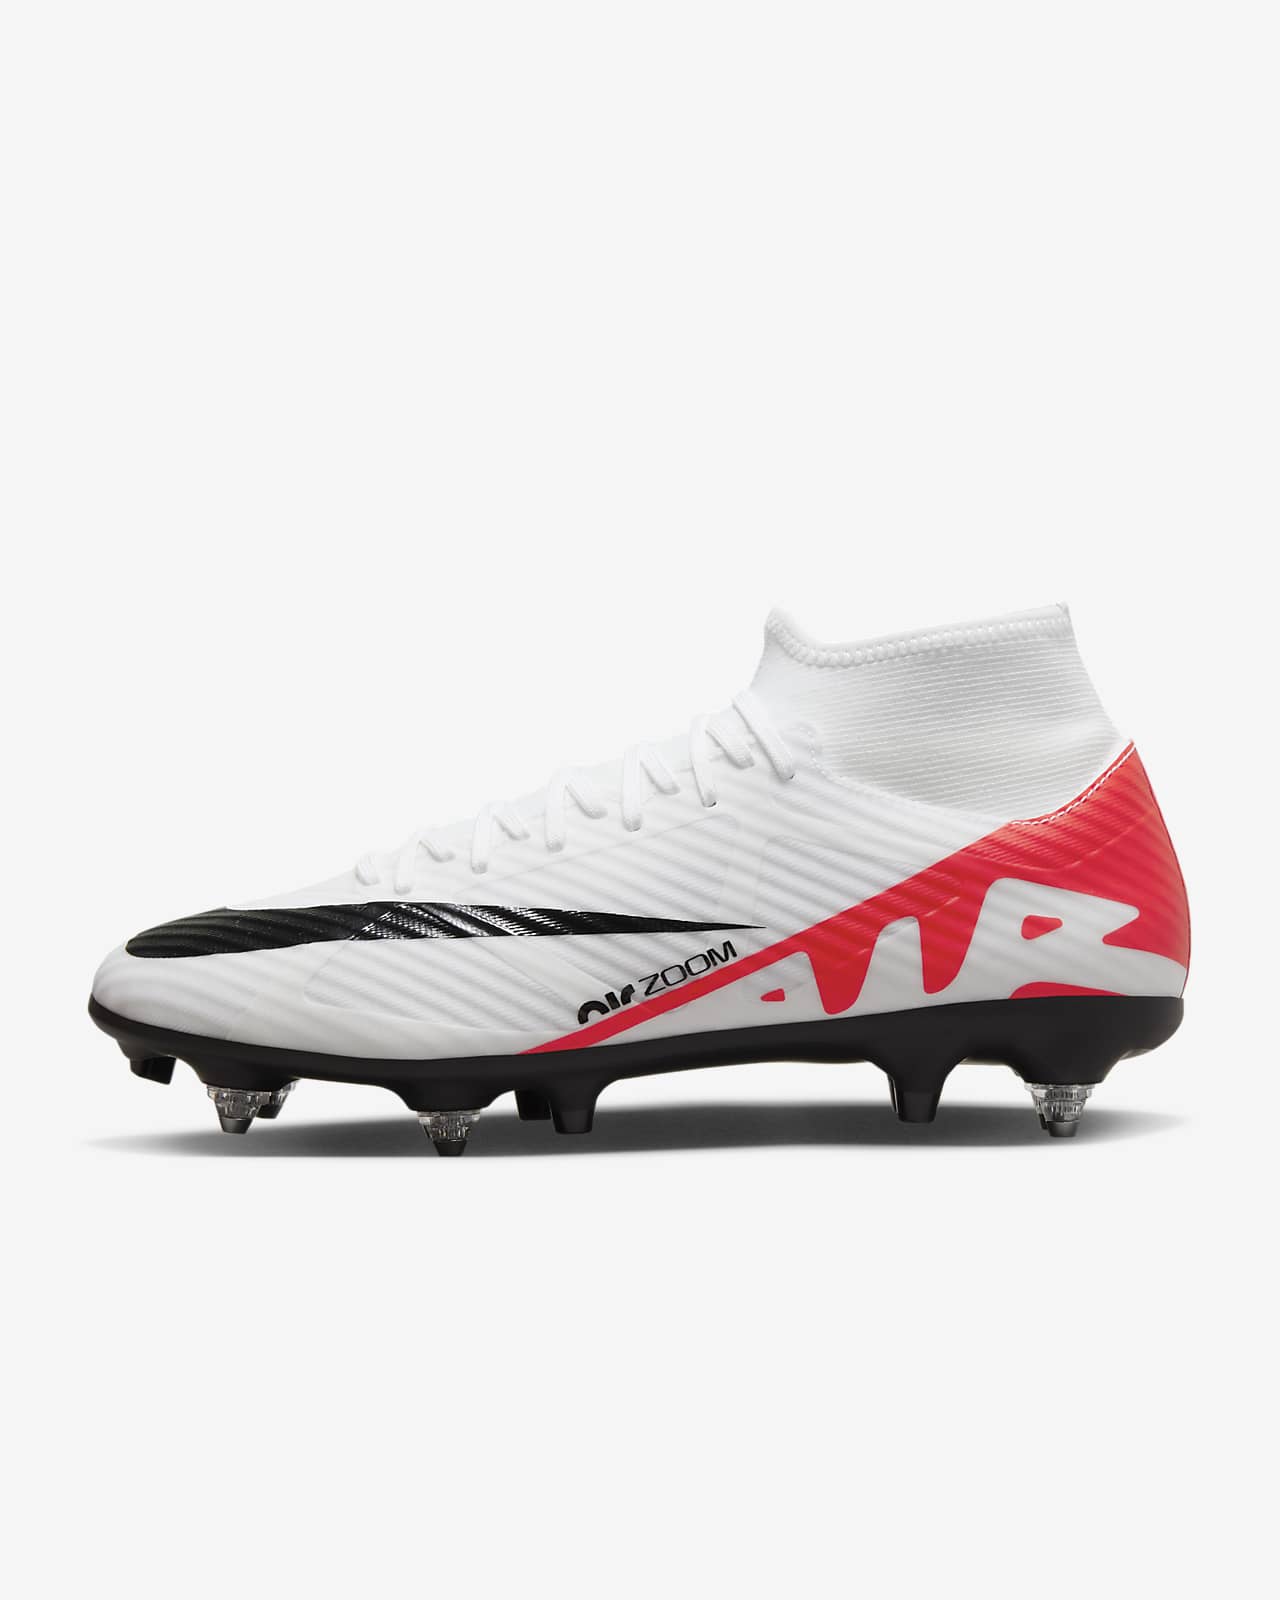 Mercurial 9 Academy Soft-Ground Football Boot. BE